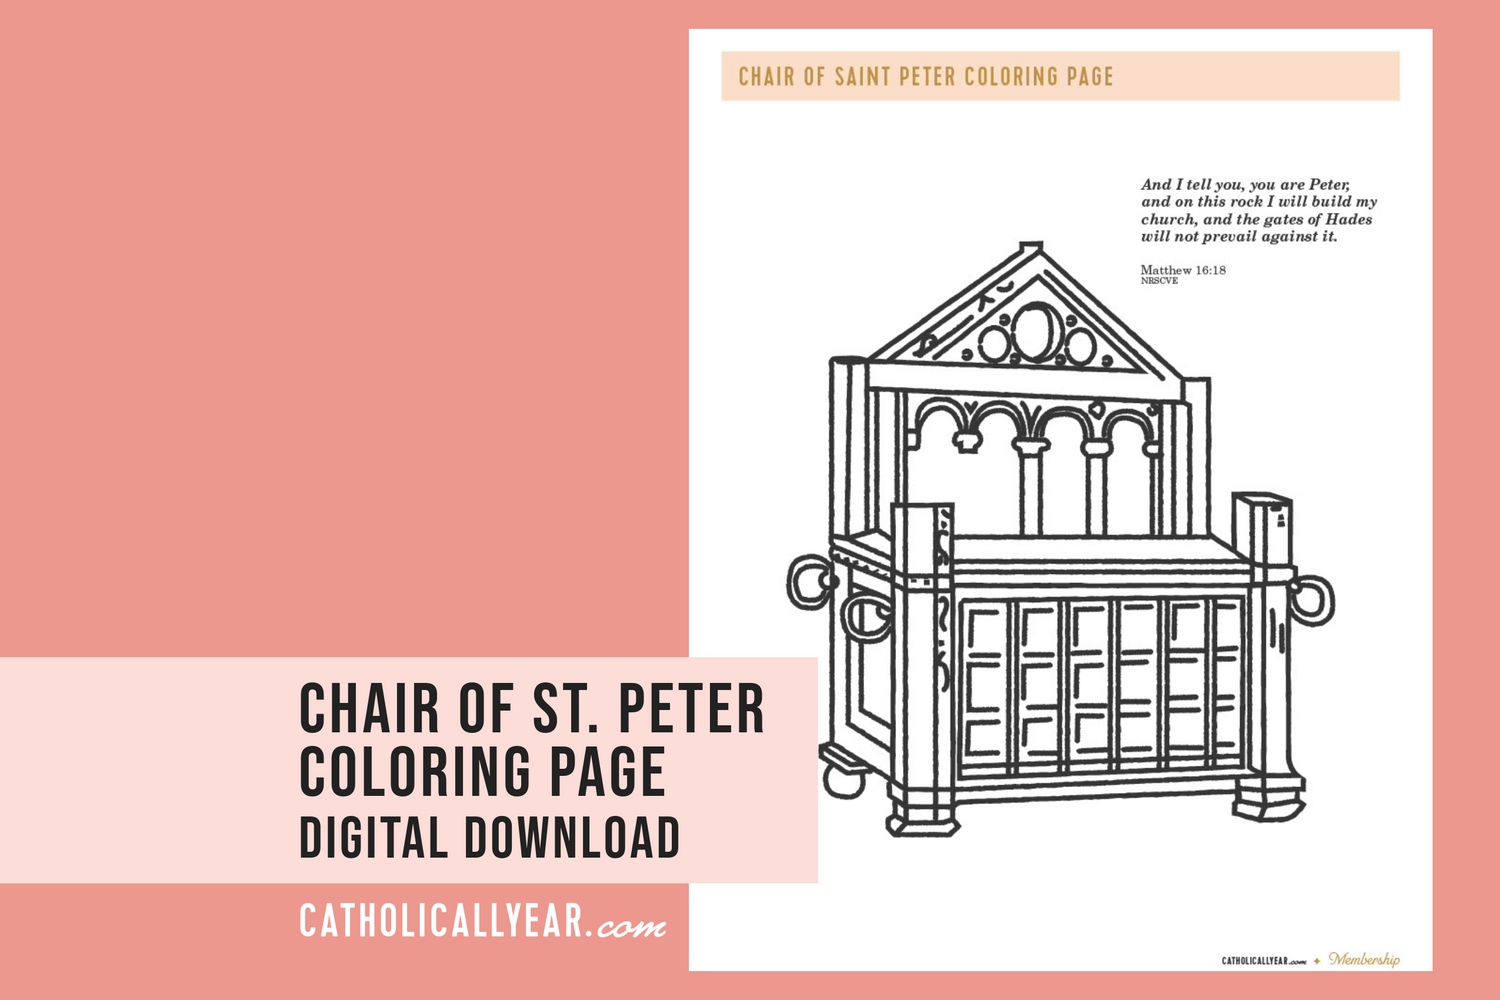 Chair of St. Peter Coloring Page {Digital Download}